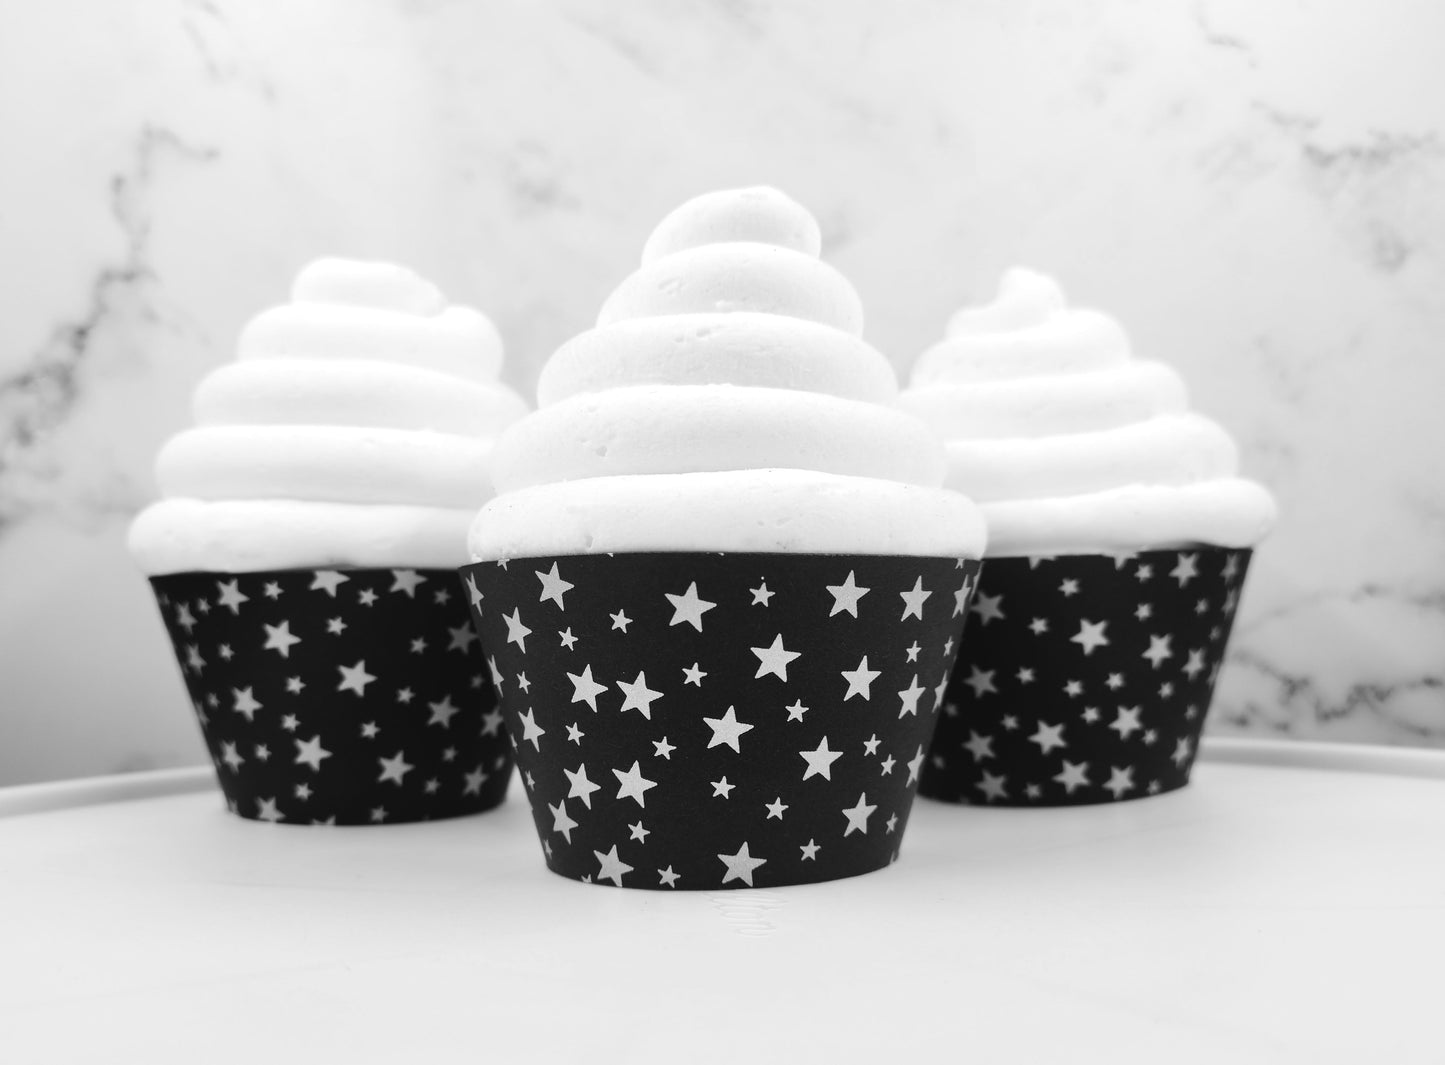 Black And Silver Star Cupcake Wrappers